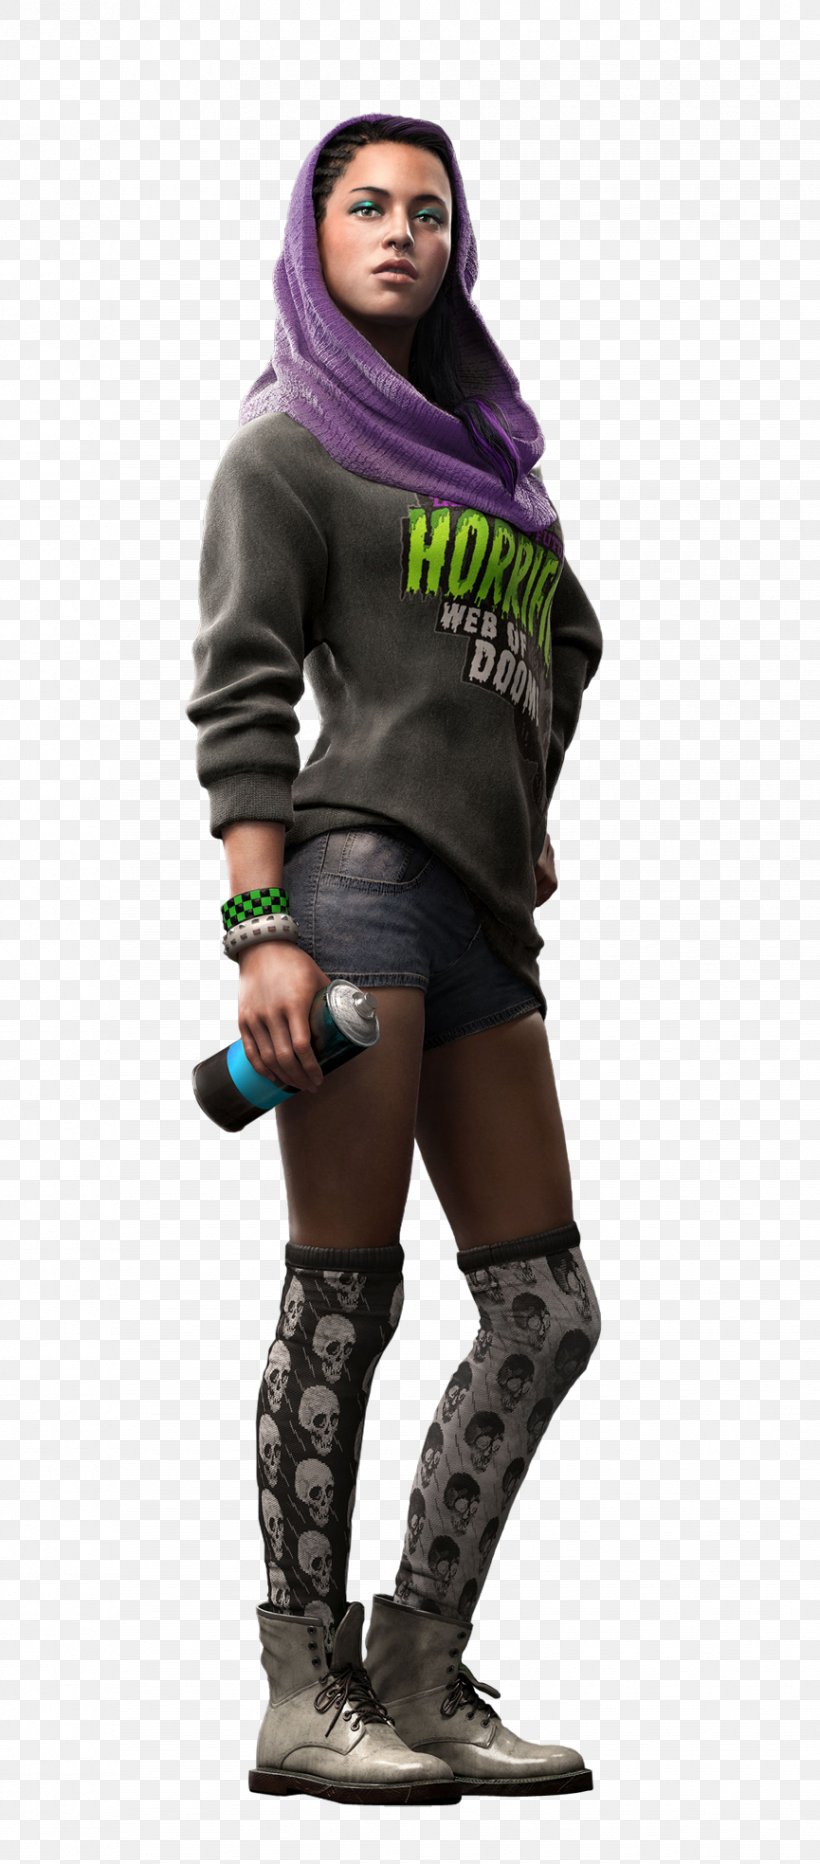 Watch Dogs 2 Sitara Costume, PNG, 865x1967px, Watch Dogs 2, Clothing, Cosplay, Costume, Costume Party Download Free